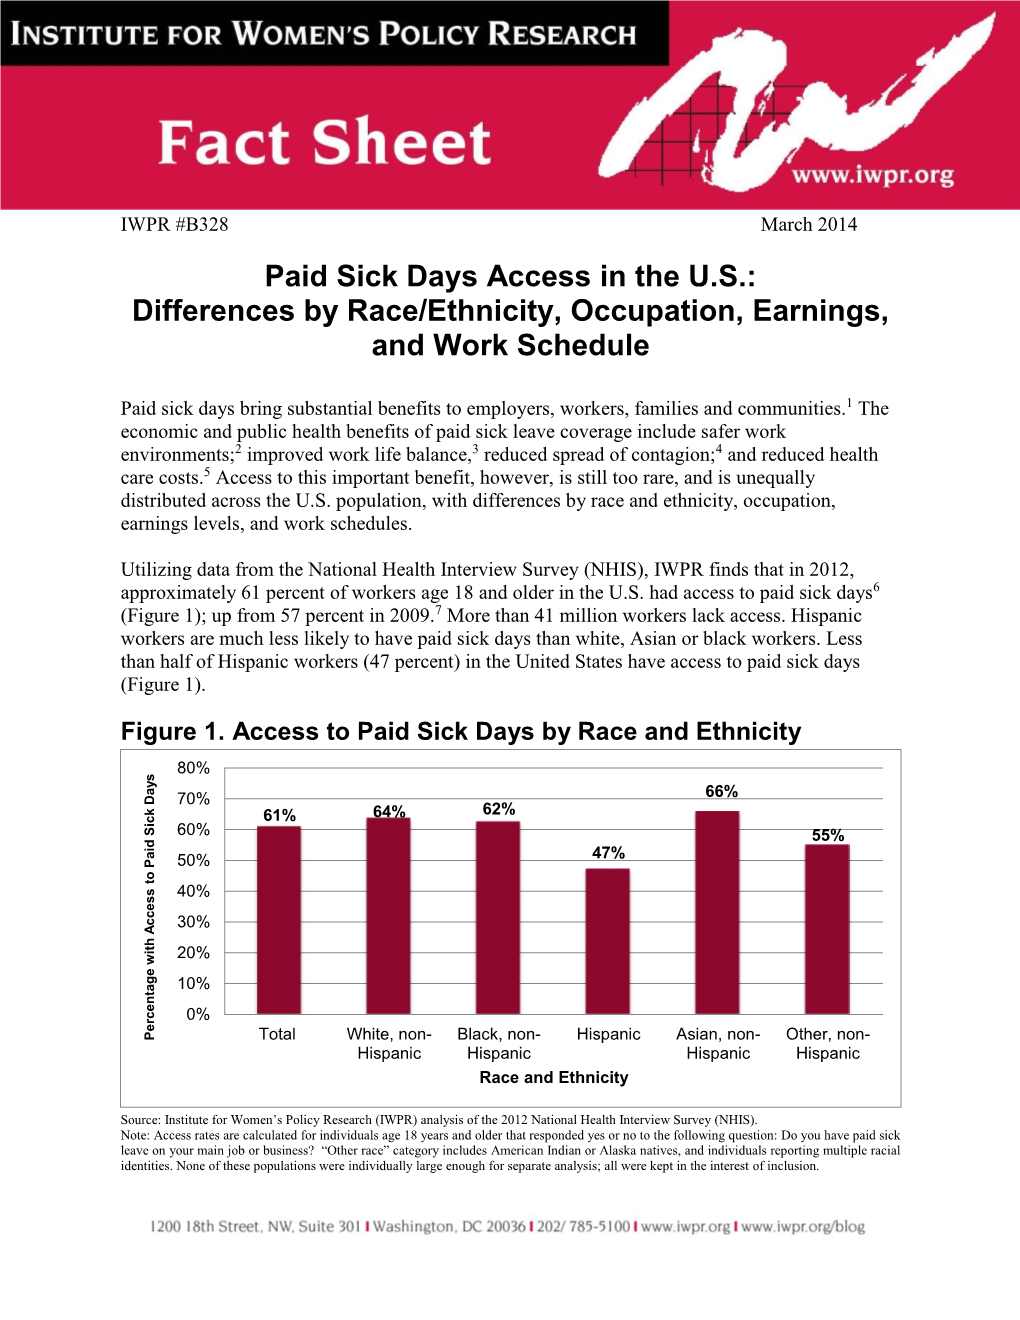 Paid Sick Days Access in the U.S.: Differences by Race/Ethnicity, Occupation, Earnings, and Work Schedule